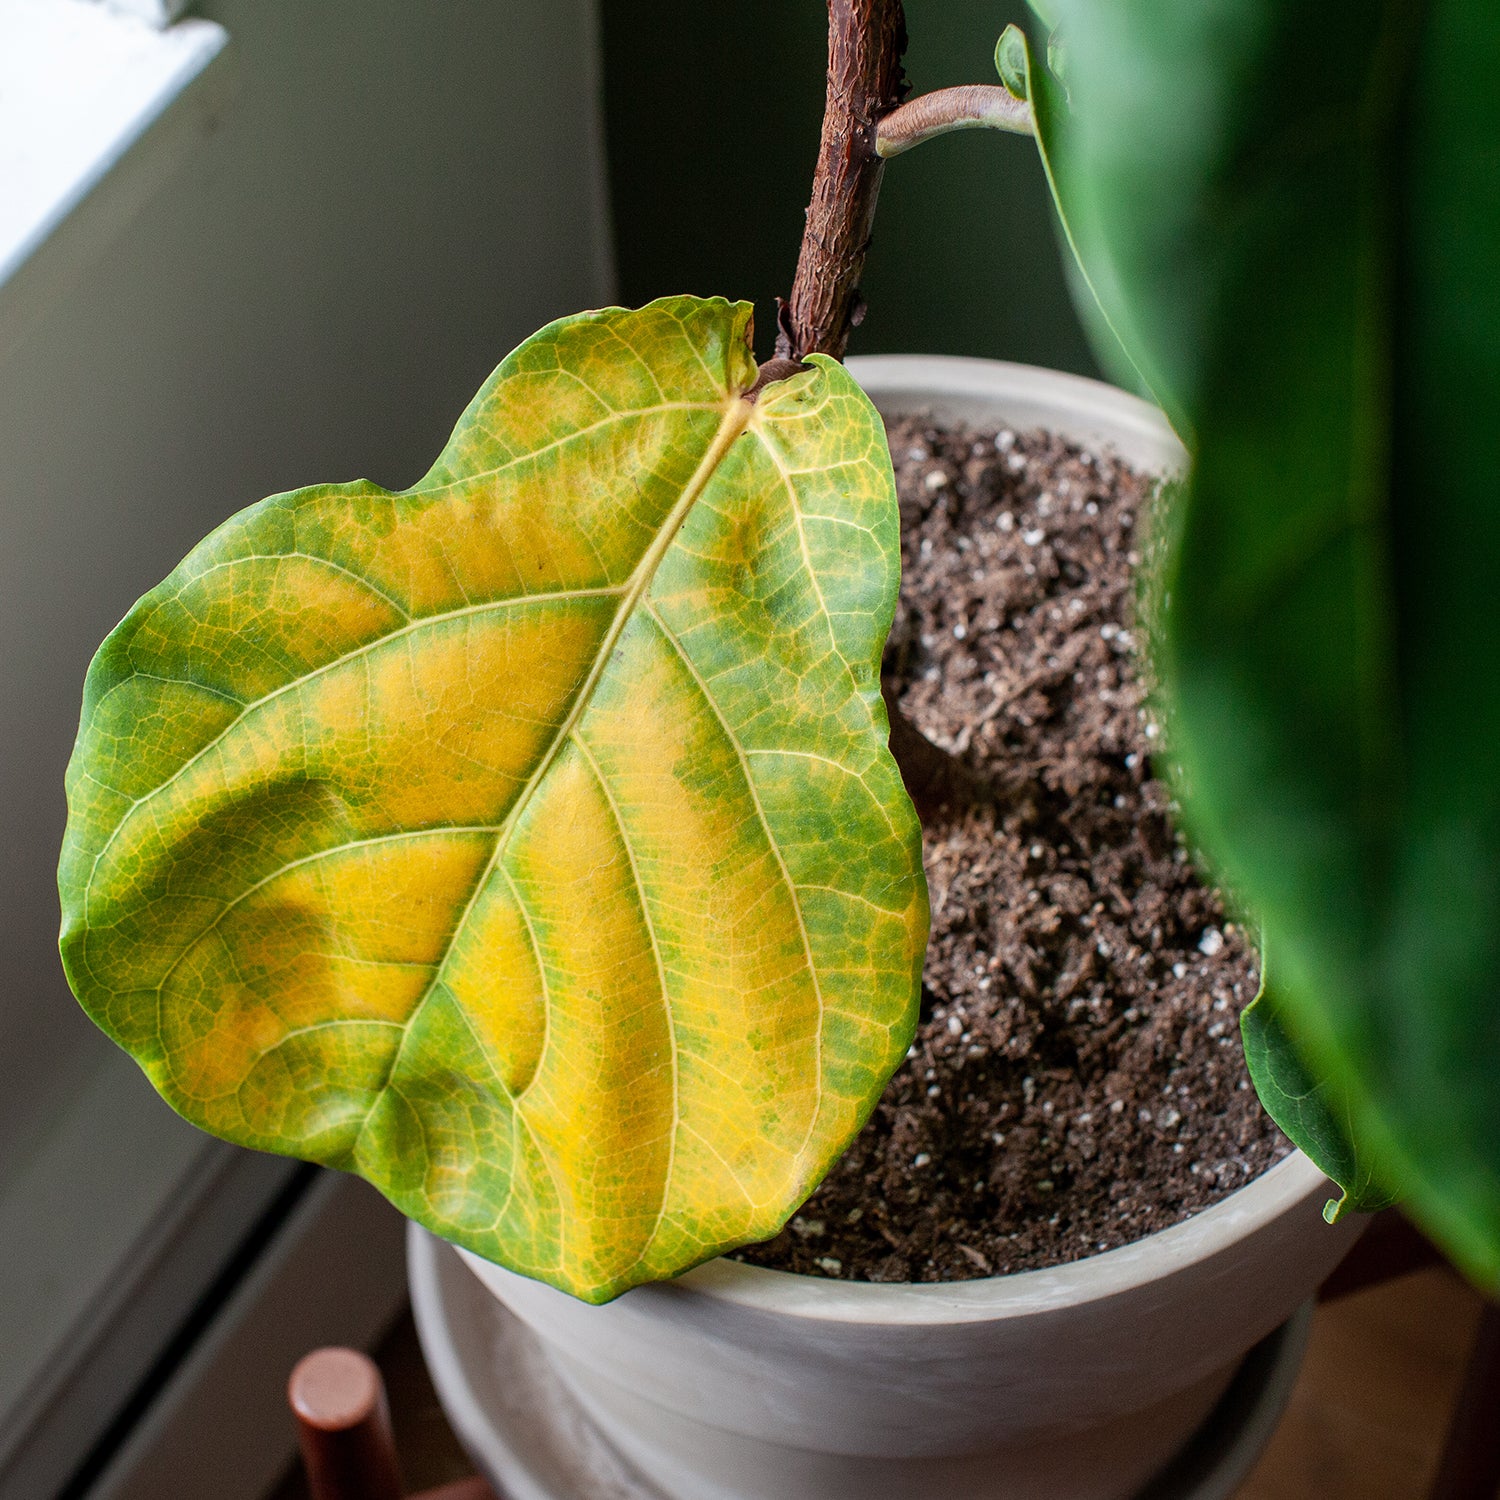 tage ned Modtager vinder Answers To Common Issues with Fiddle Leaf Figs – Roger's Gardens